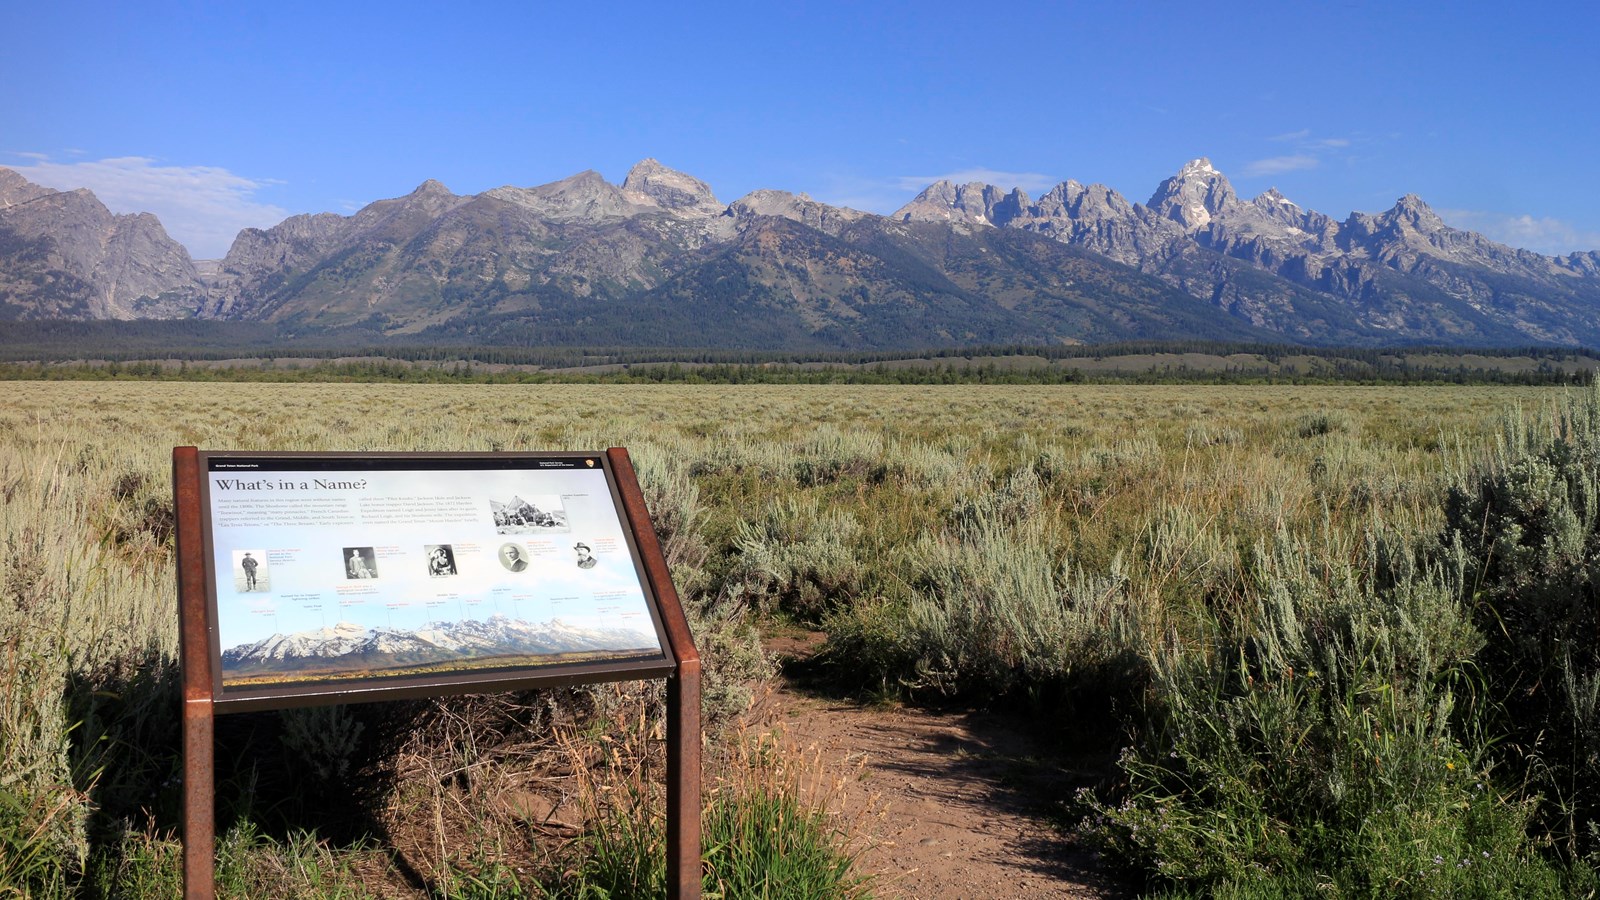 Wayside exhibit in the foreground with green sagebrush plains beyond and mountains rising beyond.